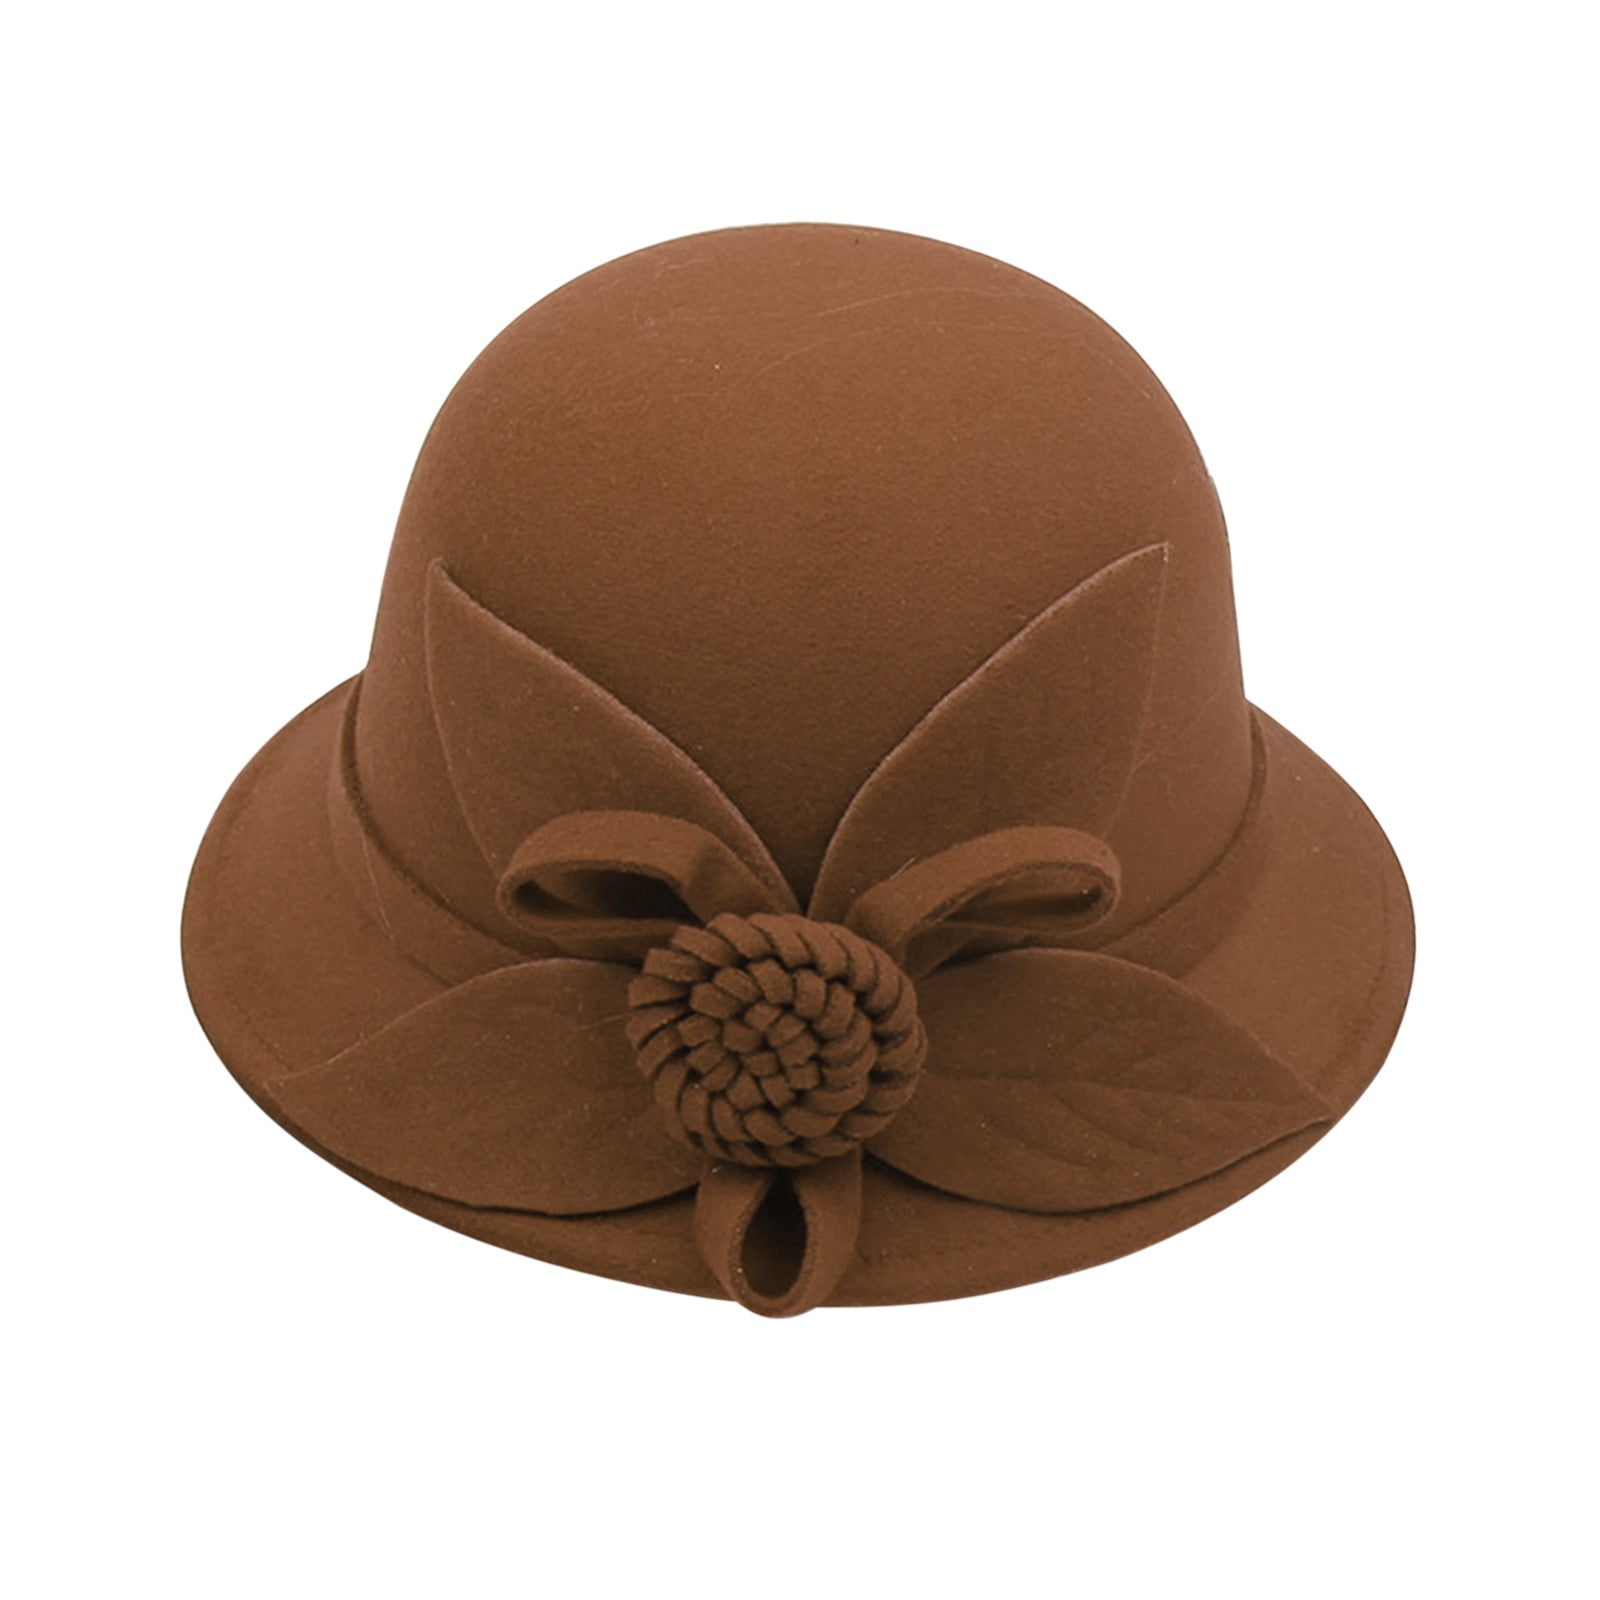 LBECLEY Rain Hat Women's Autumn and Winter Flowers Round Top Casual  Fisherman's Basin Cap Small Bowler Hat Canvas Hats for Men Women E M